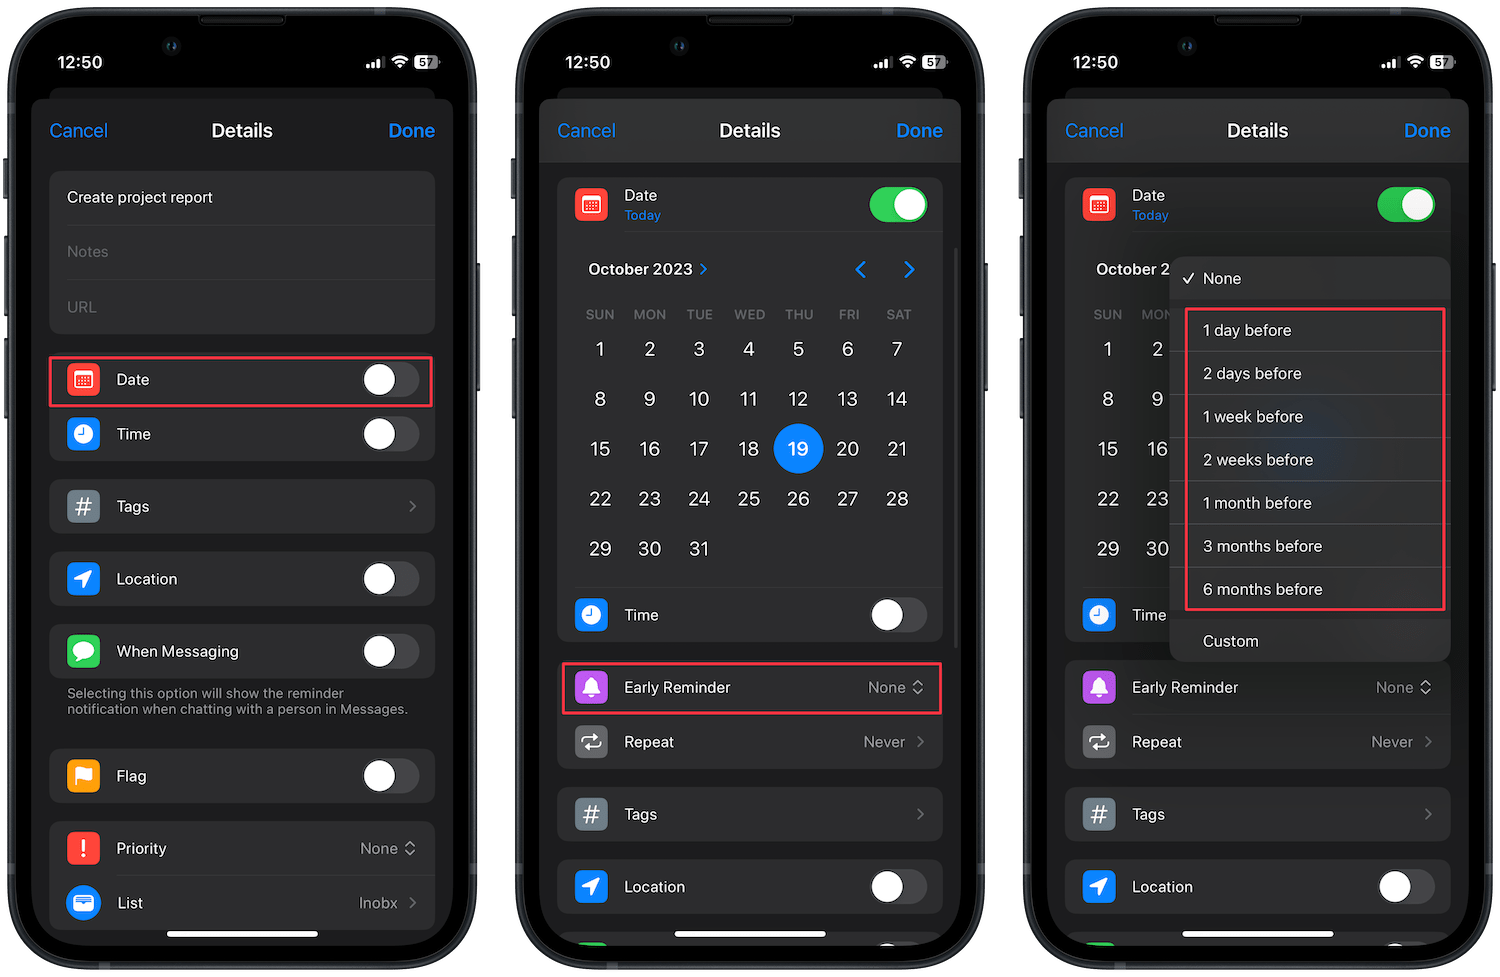 Early reminders feature on iPhone